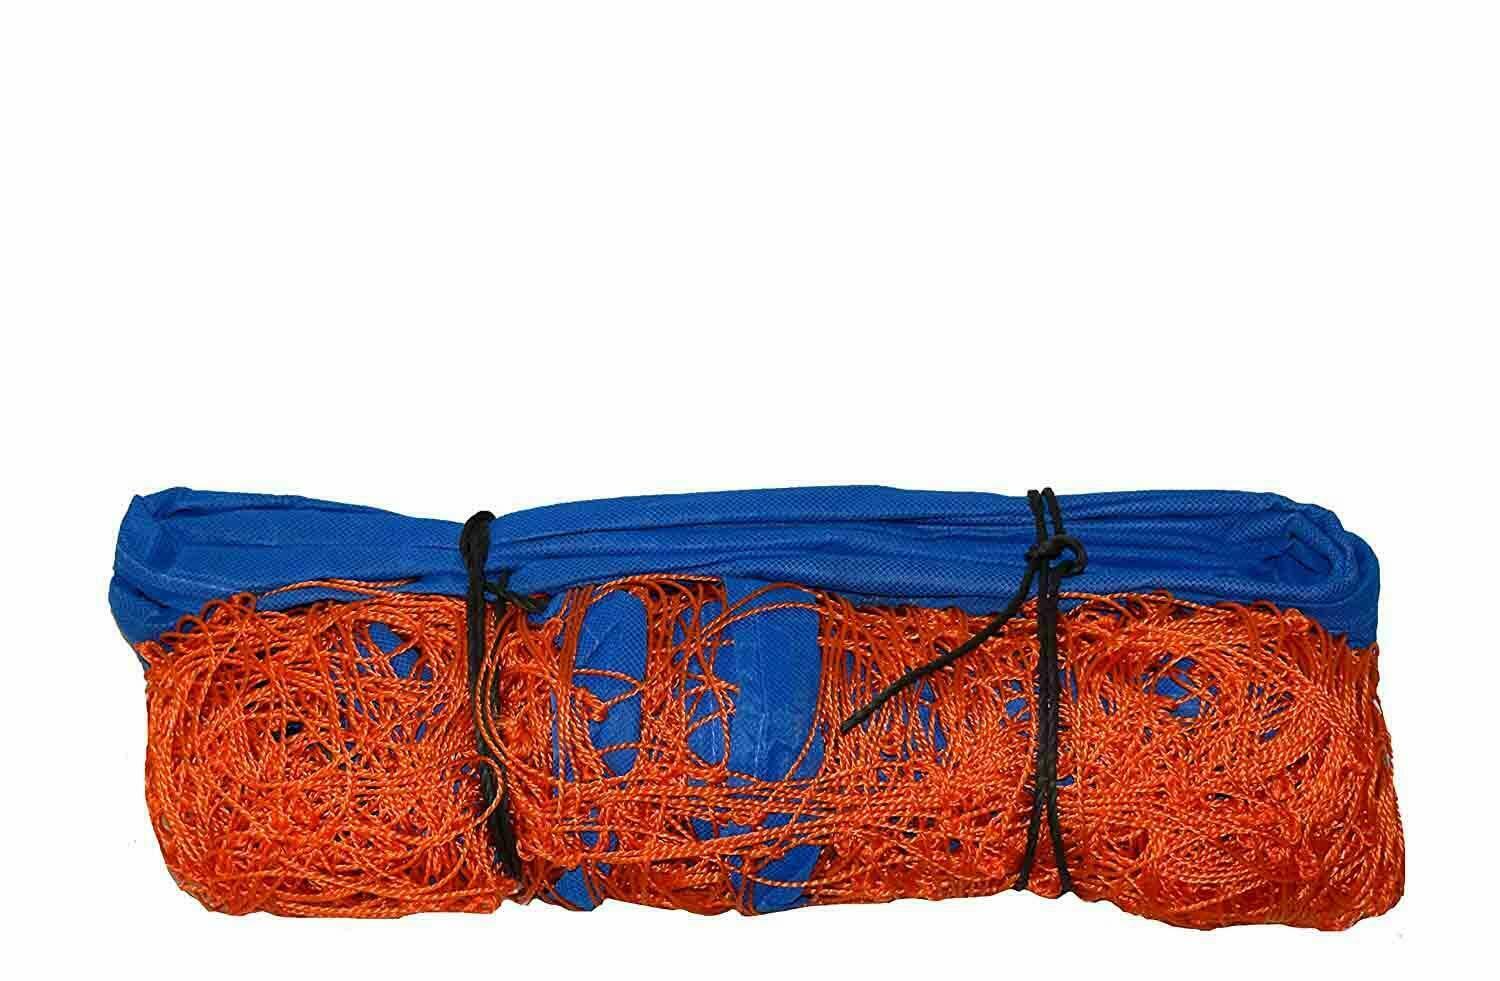 Volleyball Net Without Wire Orange Hdpe 1.5 Mm Thickness 9.5 X 1 Mtrs 100 Mesh